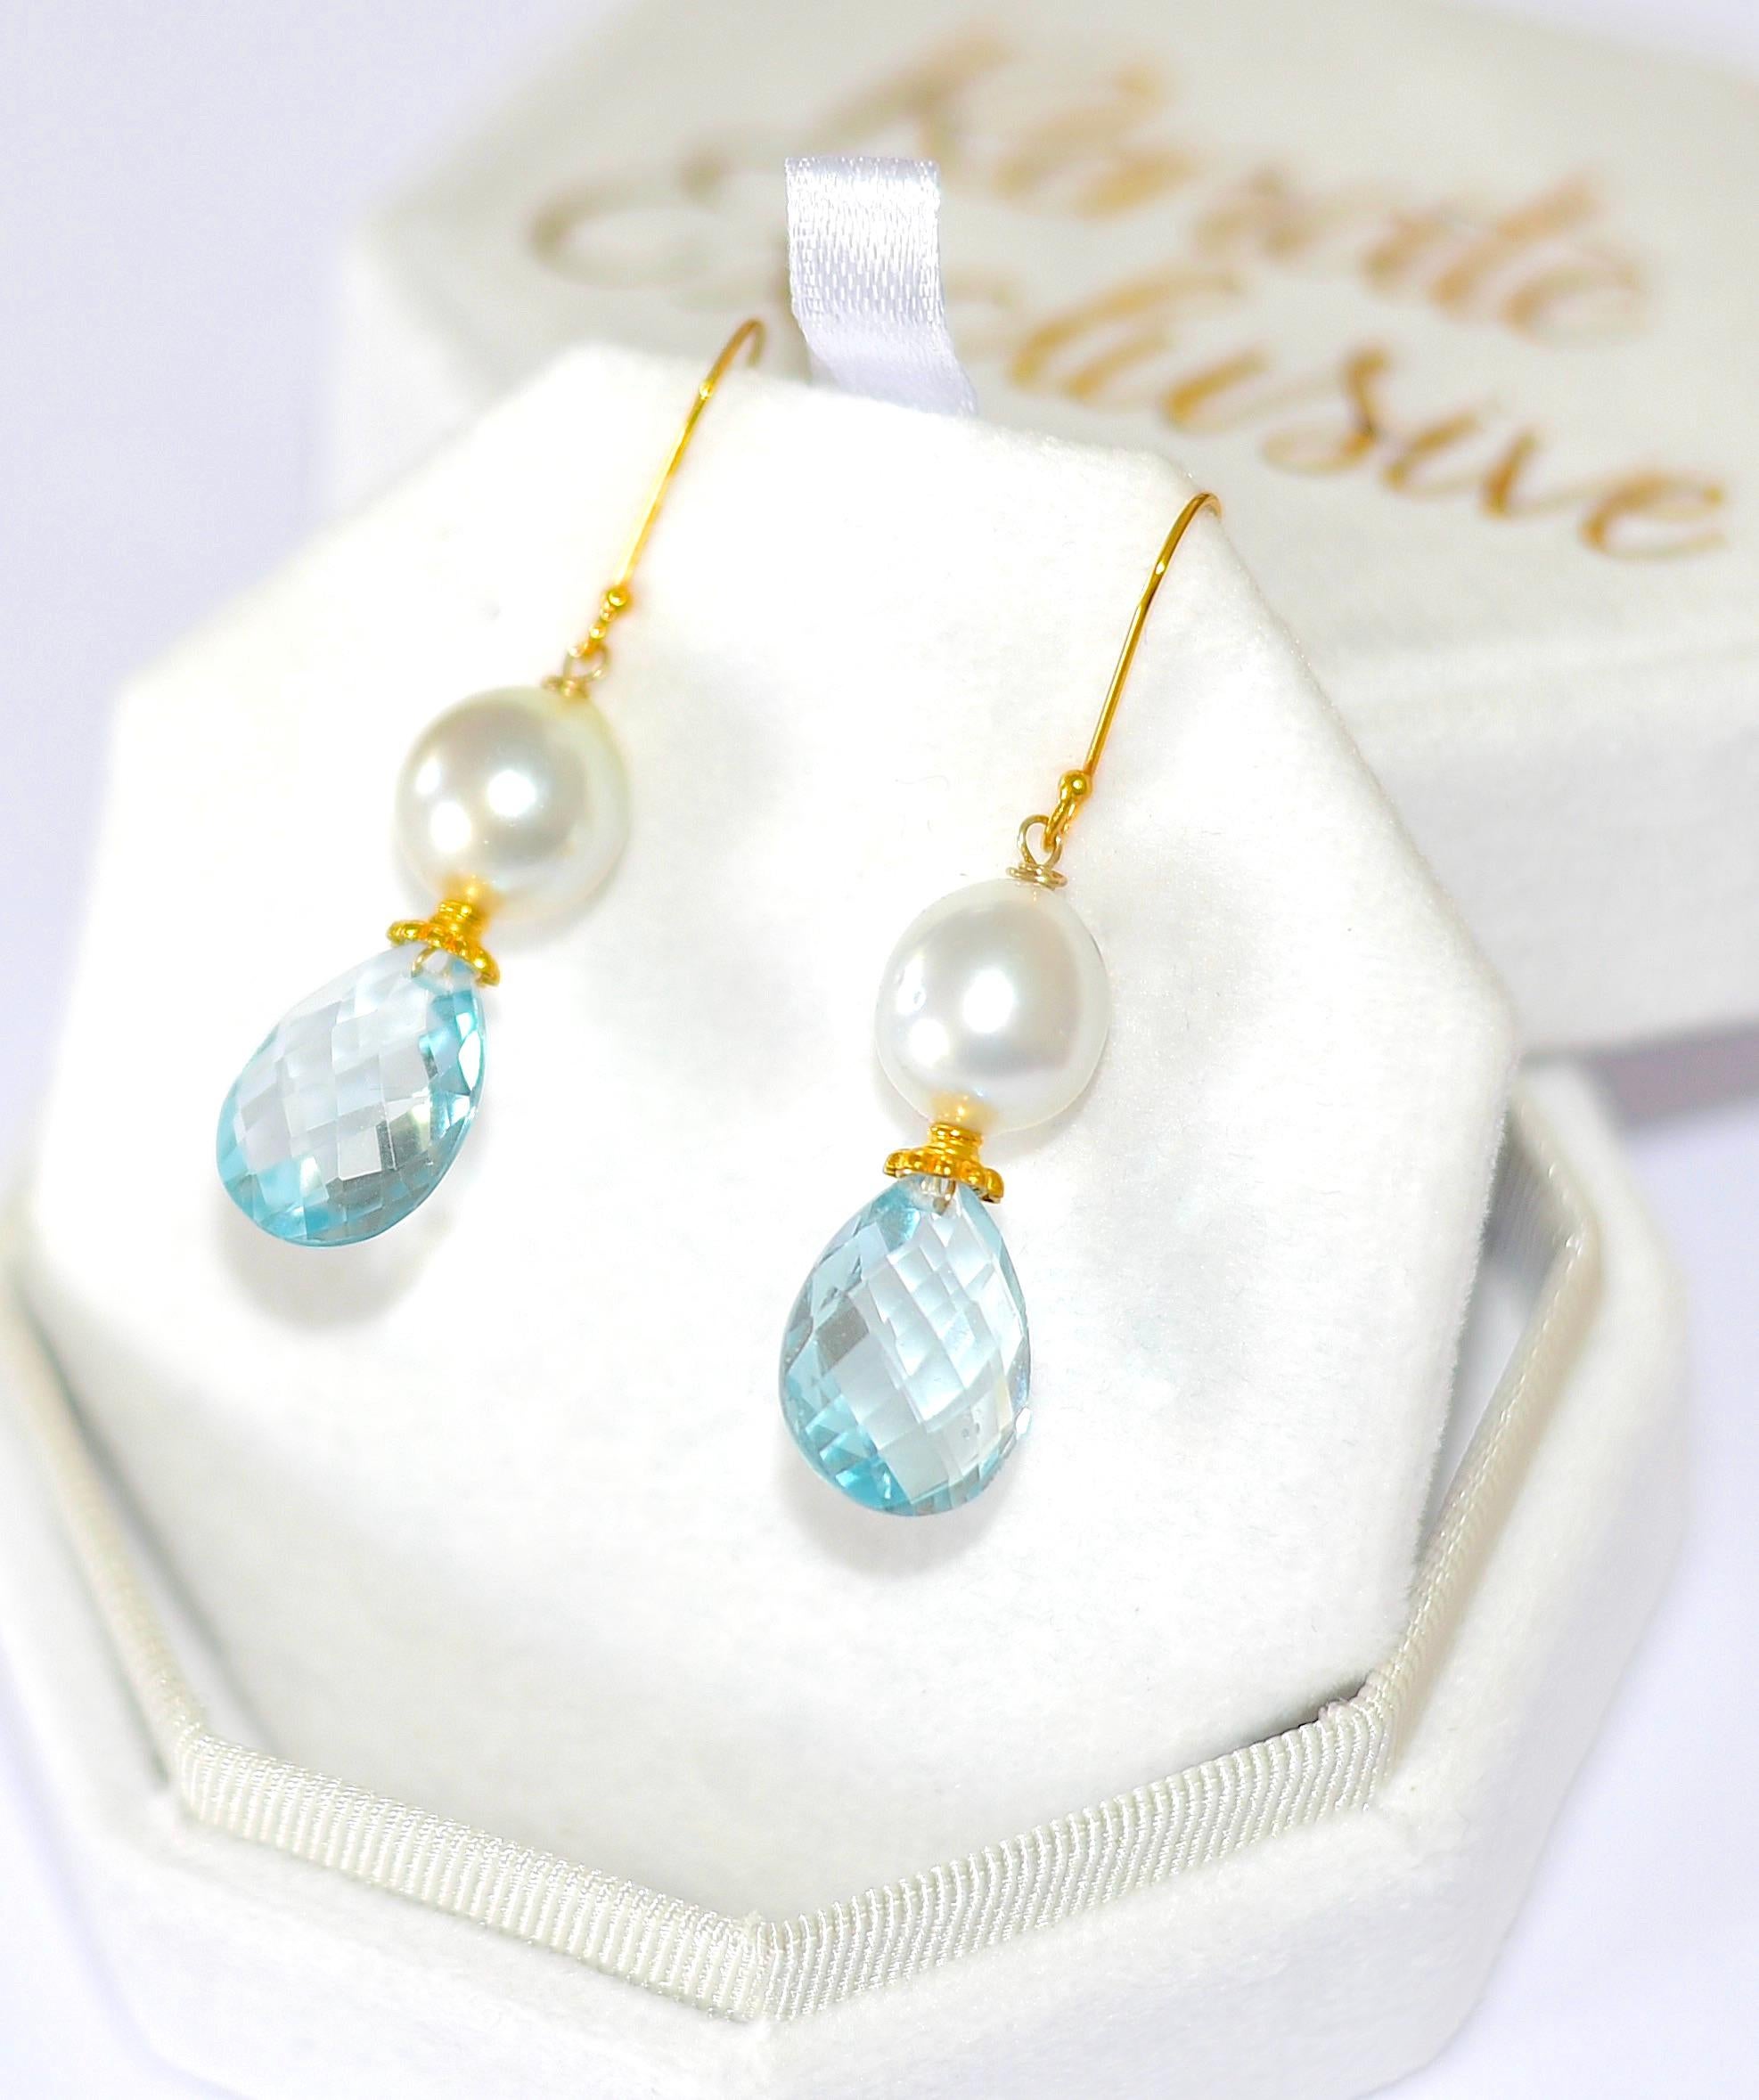 White South Sea Cultured Pearl, Blue Topaz Earrings in 18K Solid Yellow Gold 1